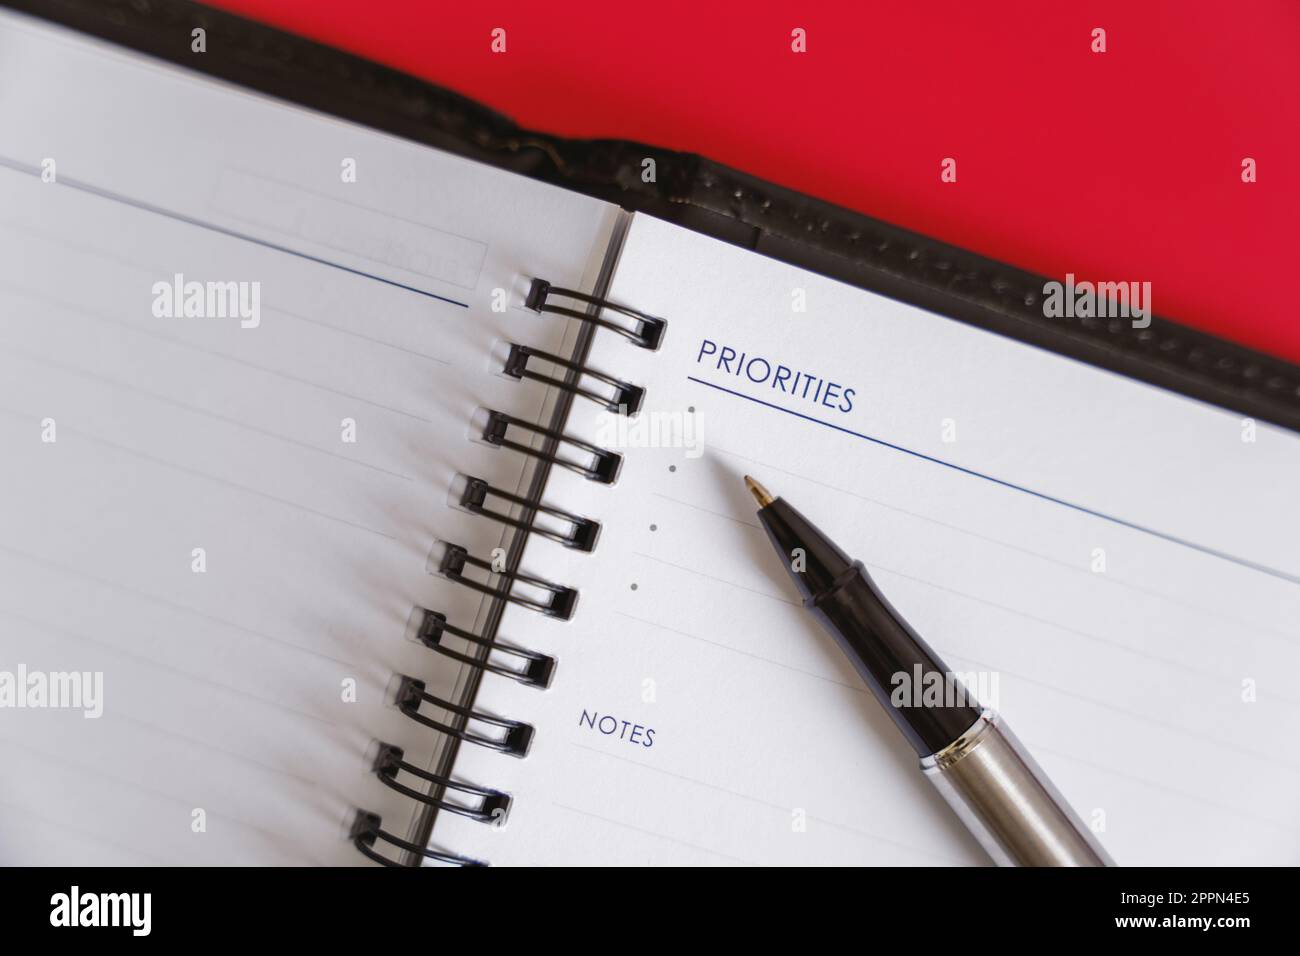 'Daily Planning with Personal Planner' - A personal planner and pen for daily planning on a red background. Stock Photo